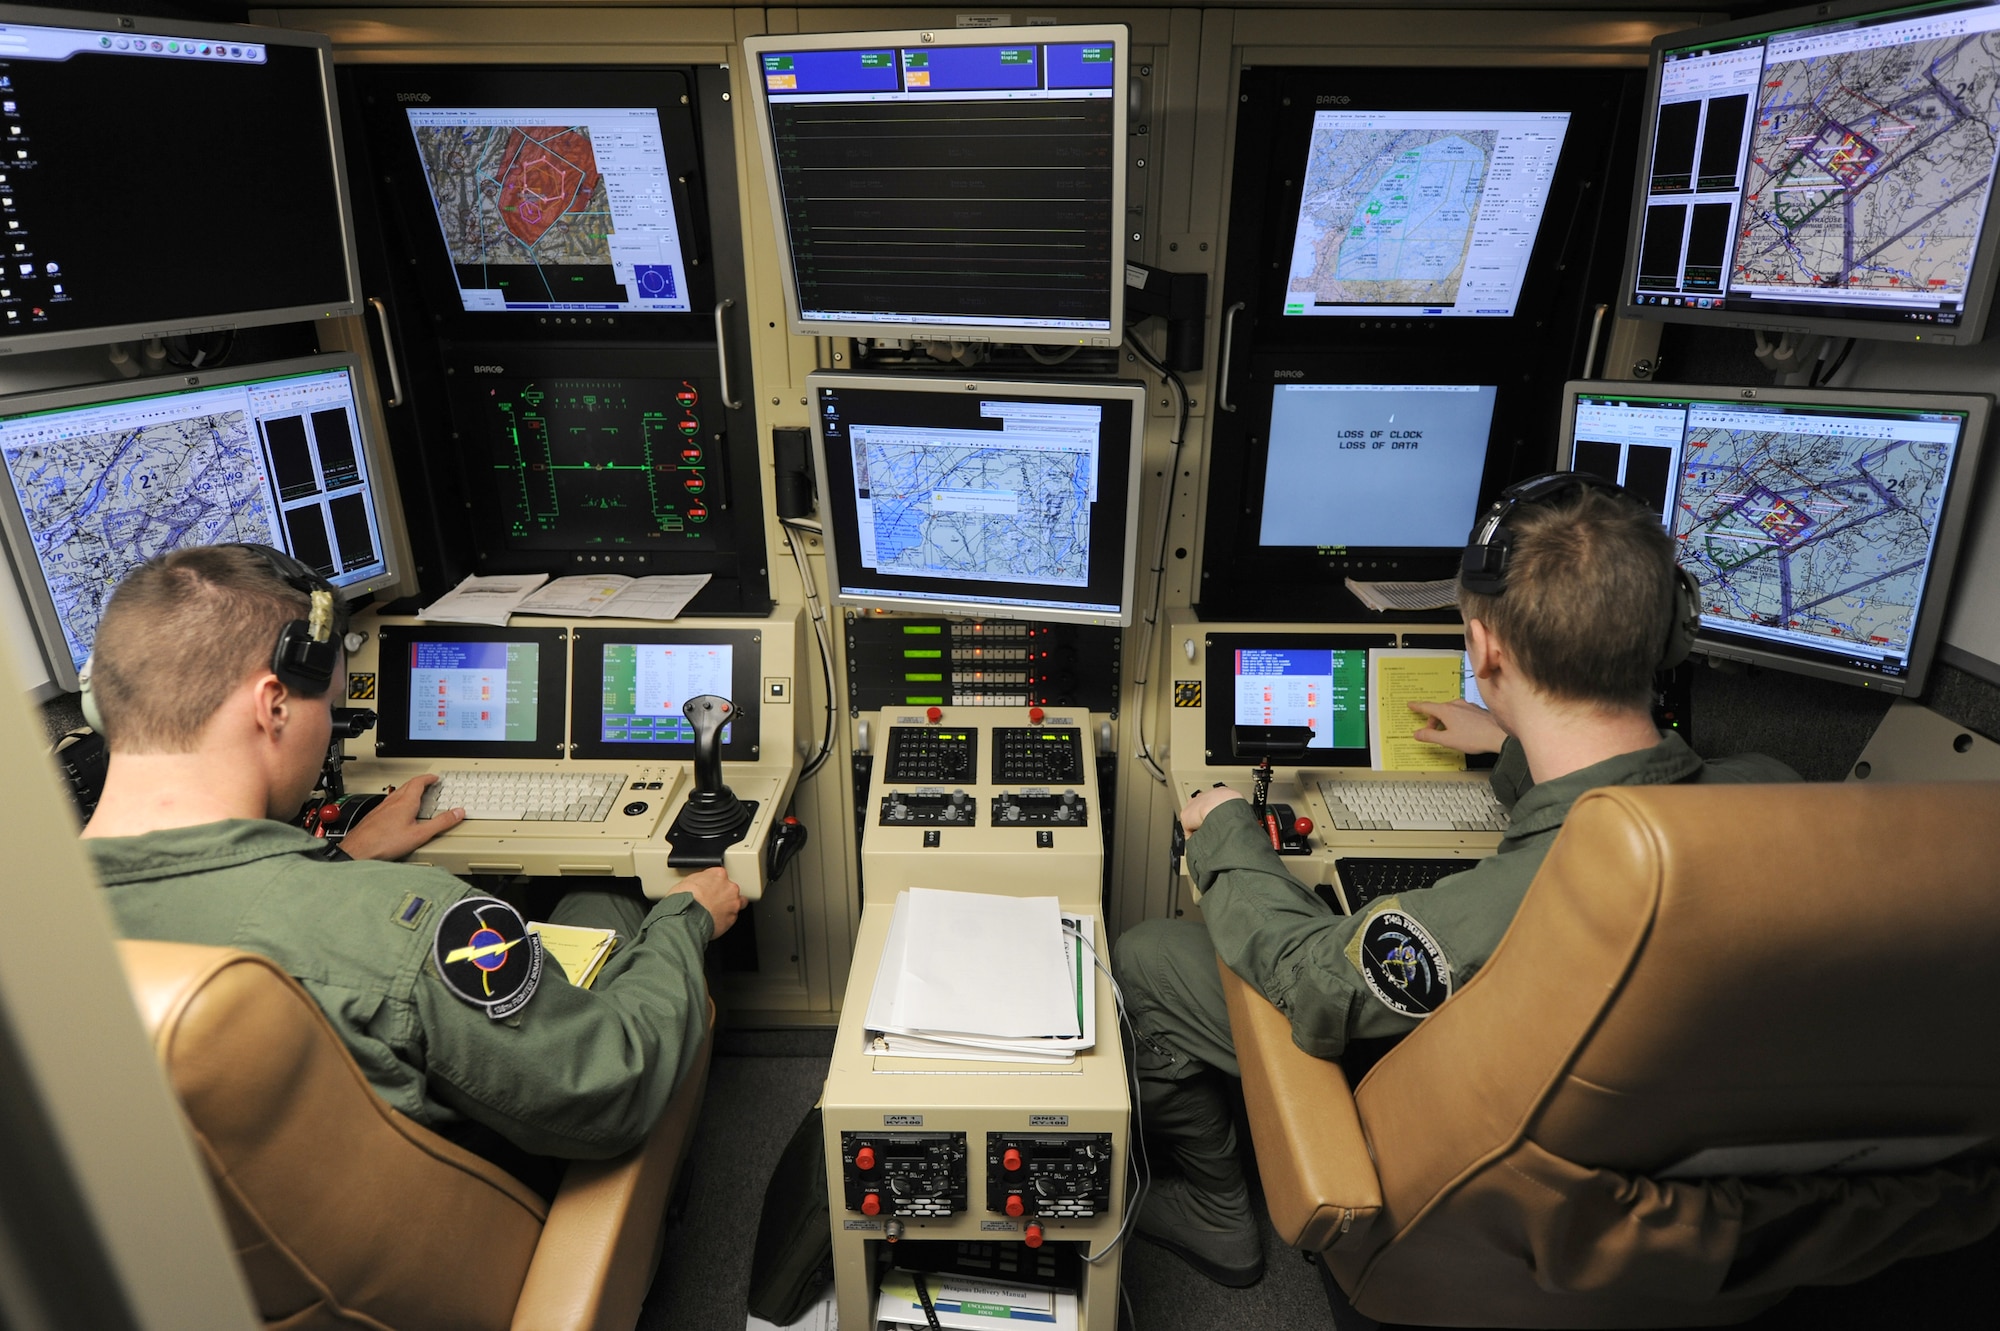 An active duty Air Force student pilot and sensor operator man the controls of a MQ-9 Reaper in a ground-based cockpit during a training mission flown from Hancock Field Air National Guard Base, Syracuse, New York.  The 174th Fighter Wing operates the only ANG MQ-9 Formal Training Unit (FTU) which trains aircrews from the active duty Air Force, Air National Guard and Air Force Reserve. (Photo by Tech. Sgt. Ricky Best/Released)
